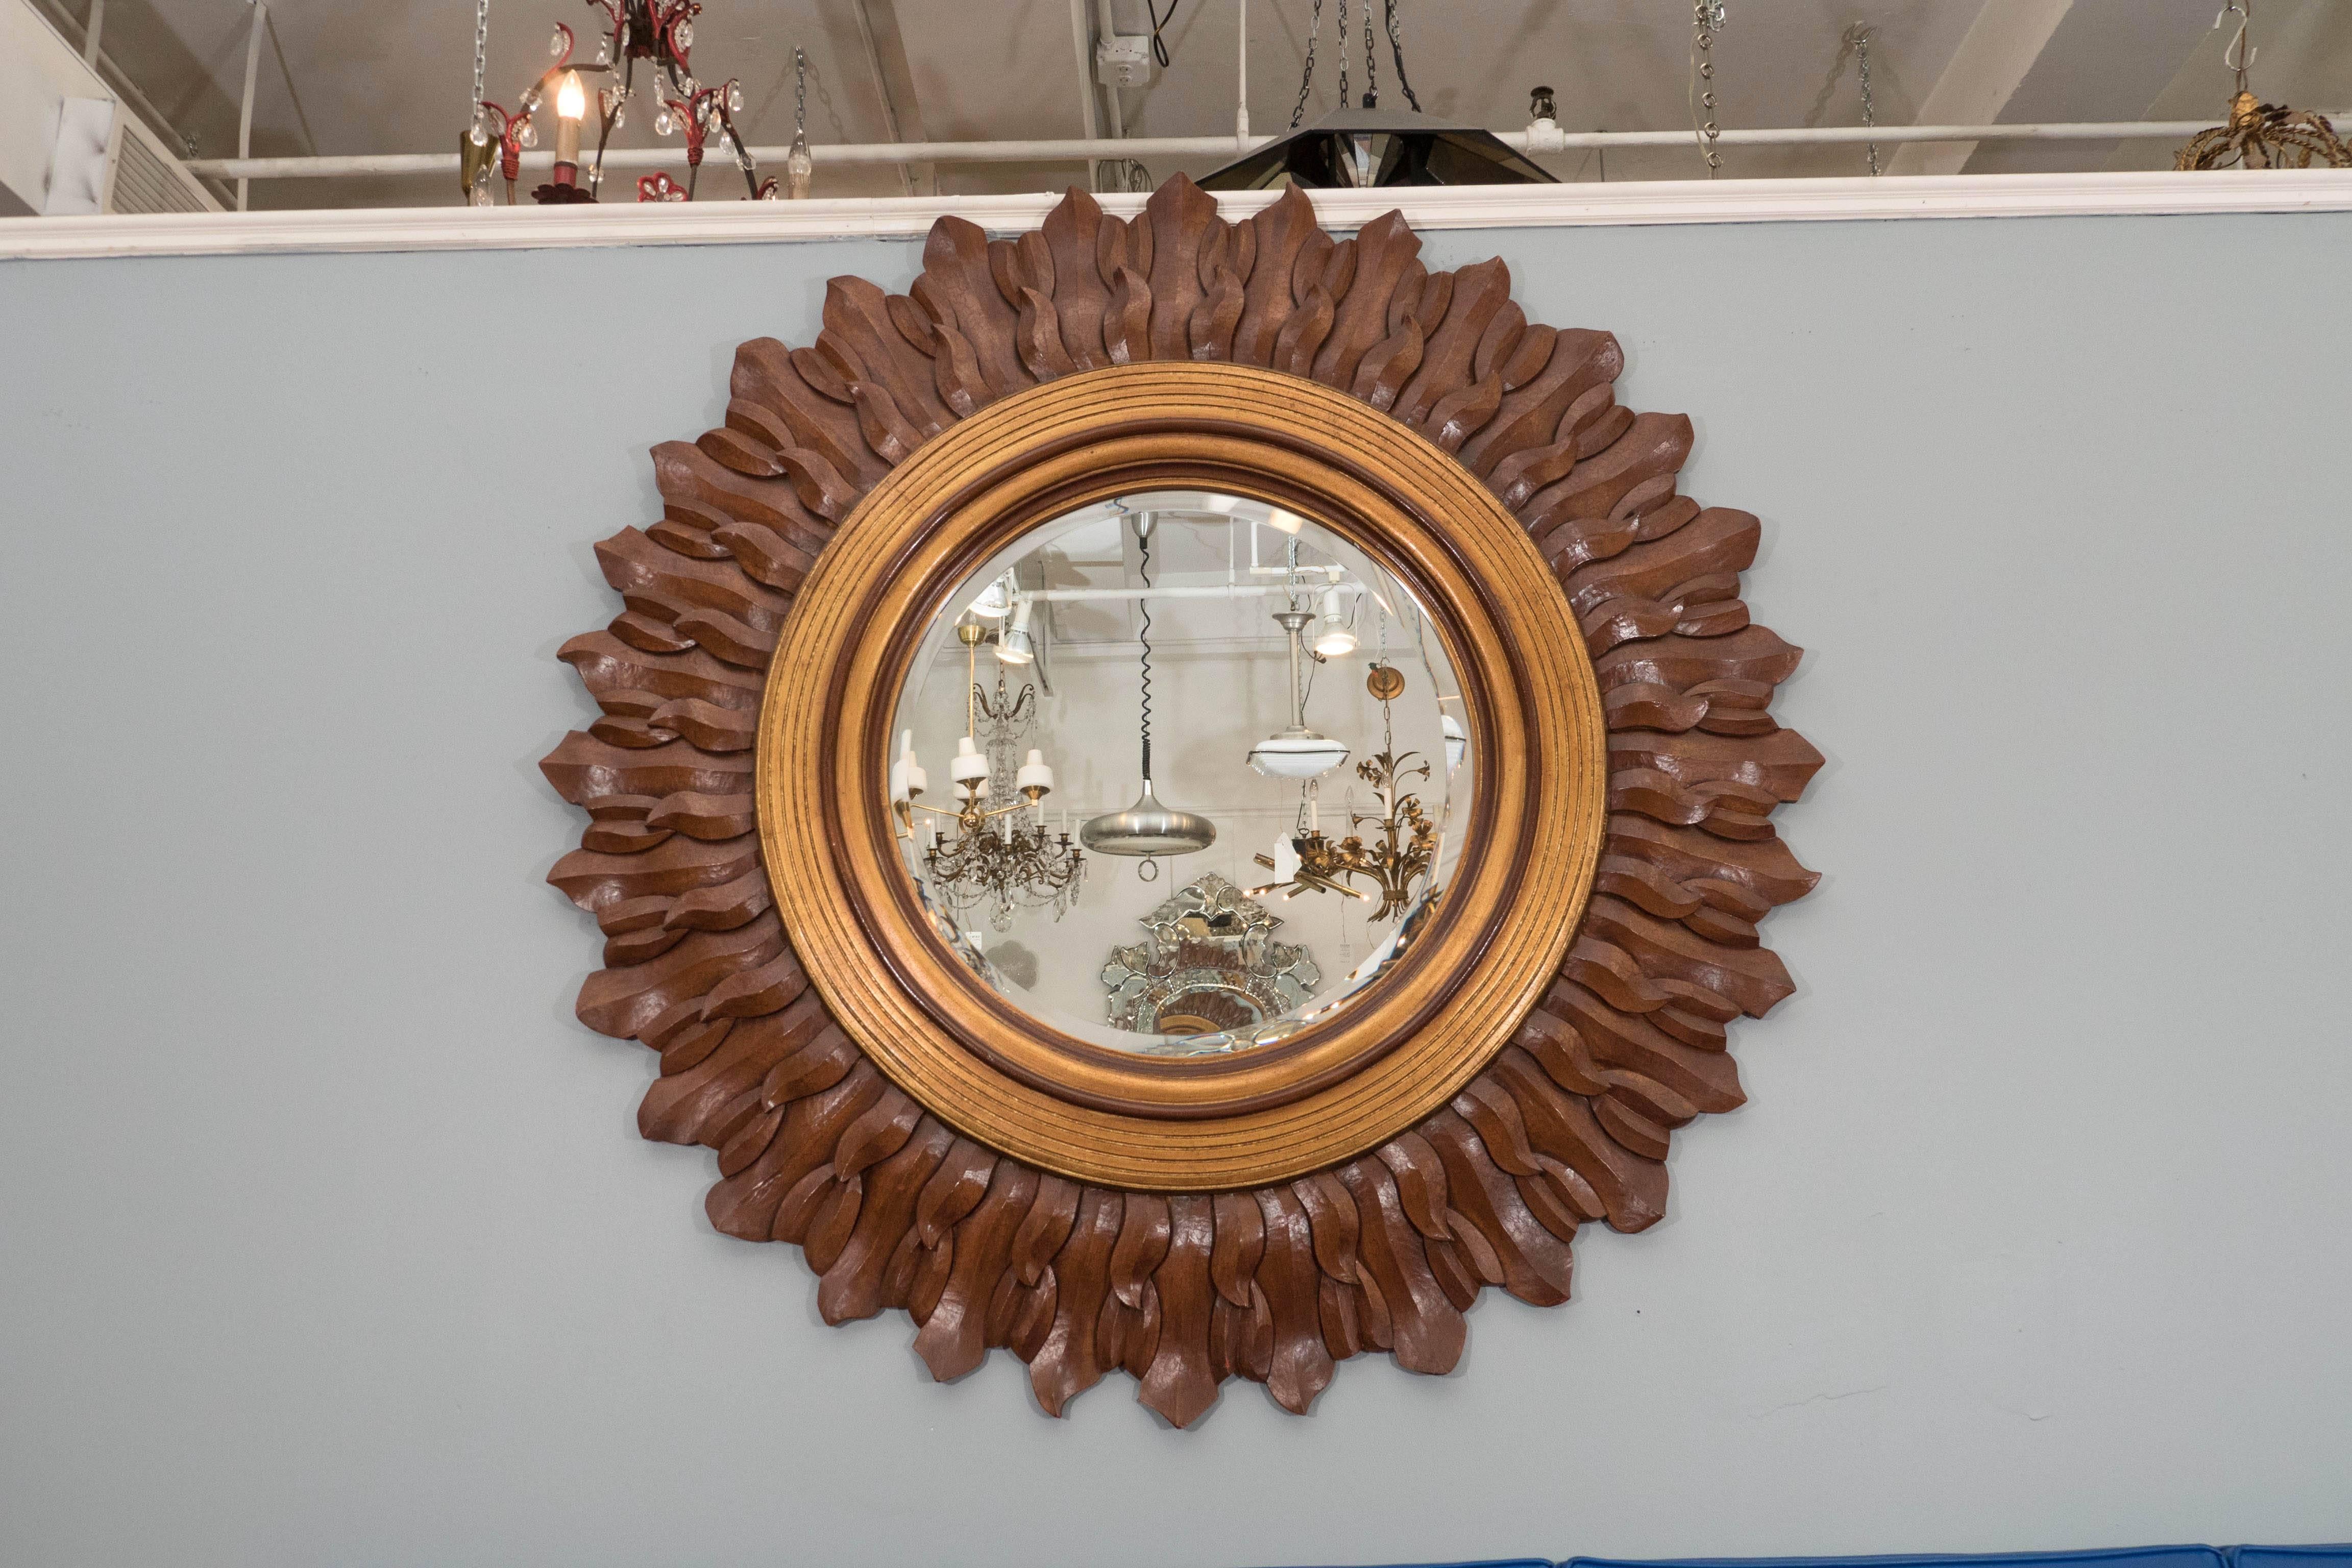 A sunburst mirror, with beveled glass inset within stepped gilded frame, surrounded by rays in carved and antiqued wood. Markings include [CSDF 1998], stamped to the frame. Very good condition, consistent with age and use; mirror measures 23.5